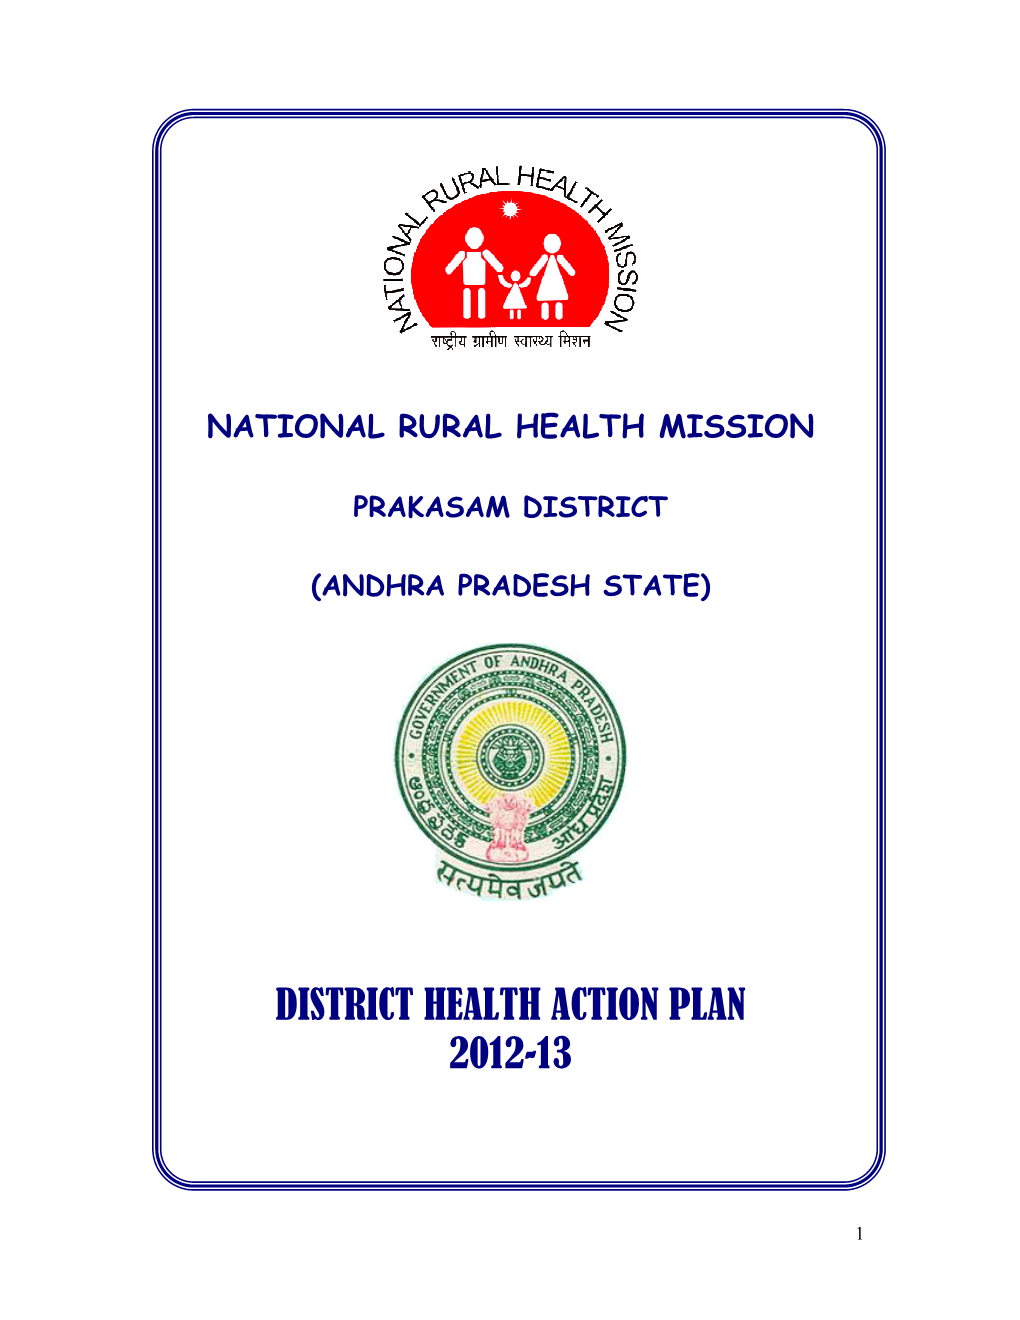 District Health Action Plan 2012-13